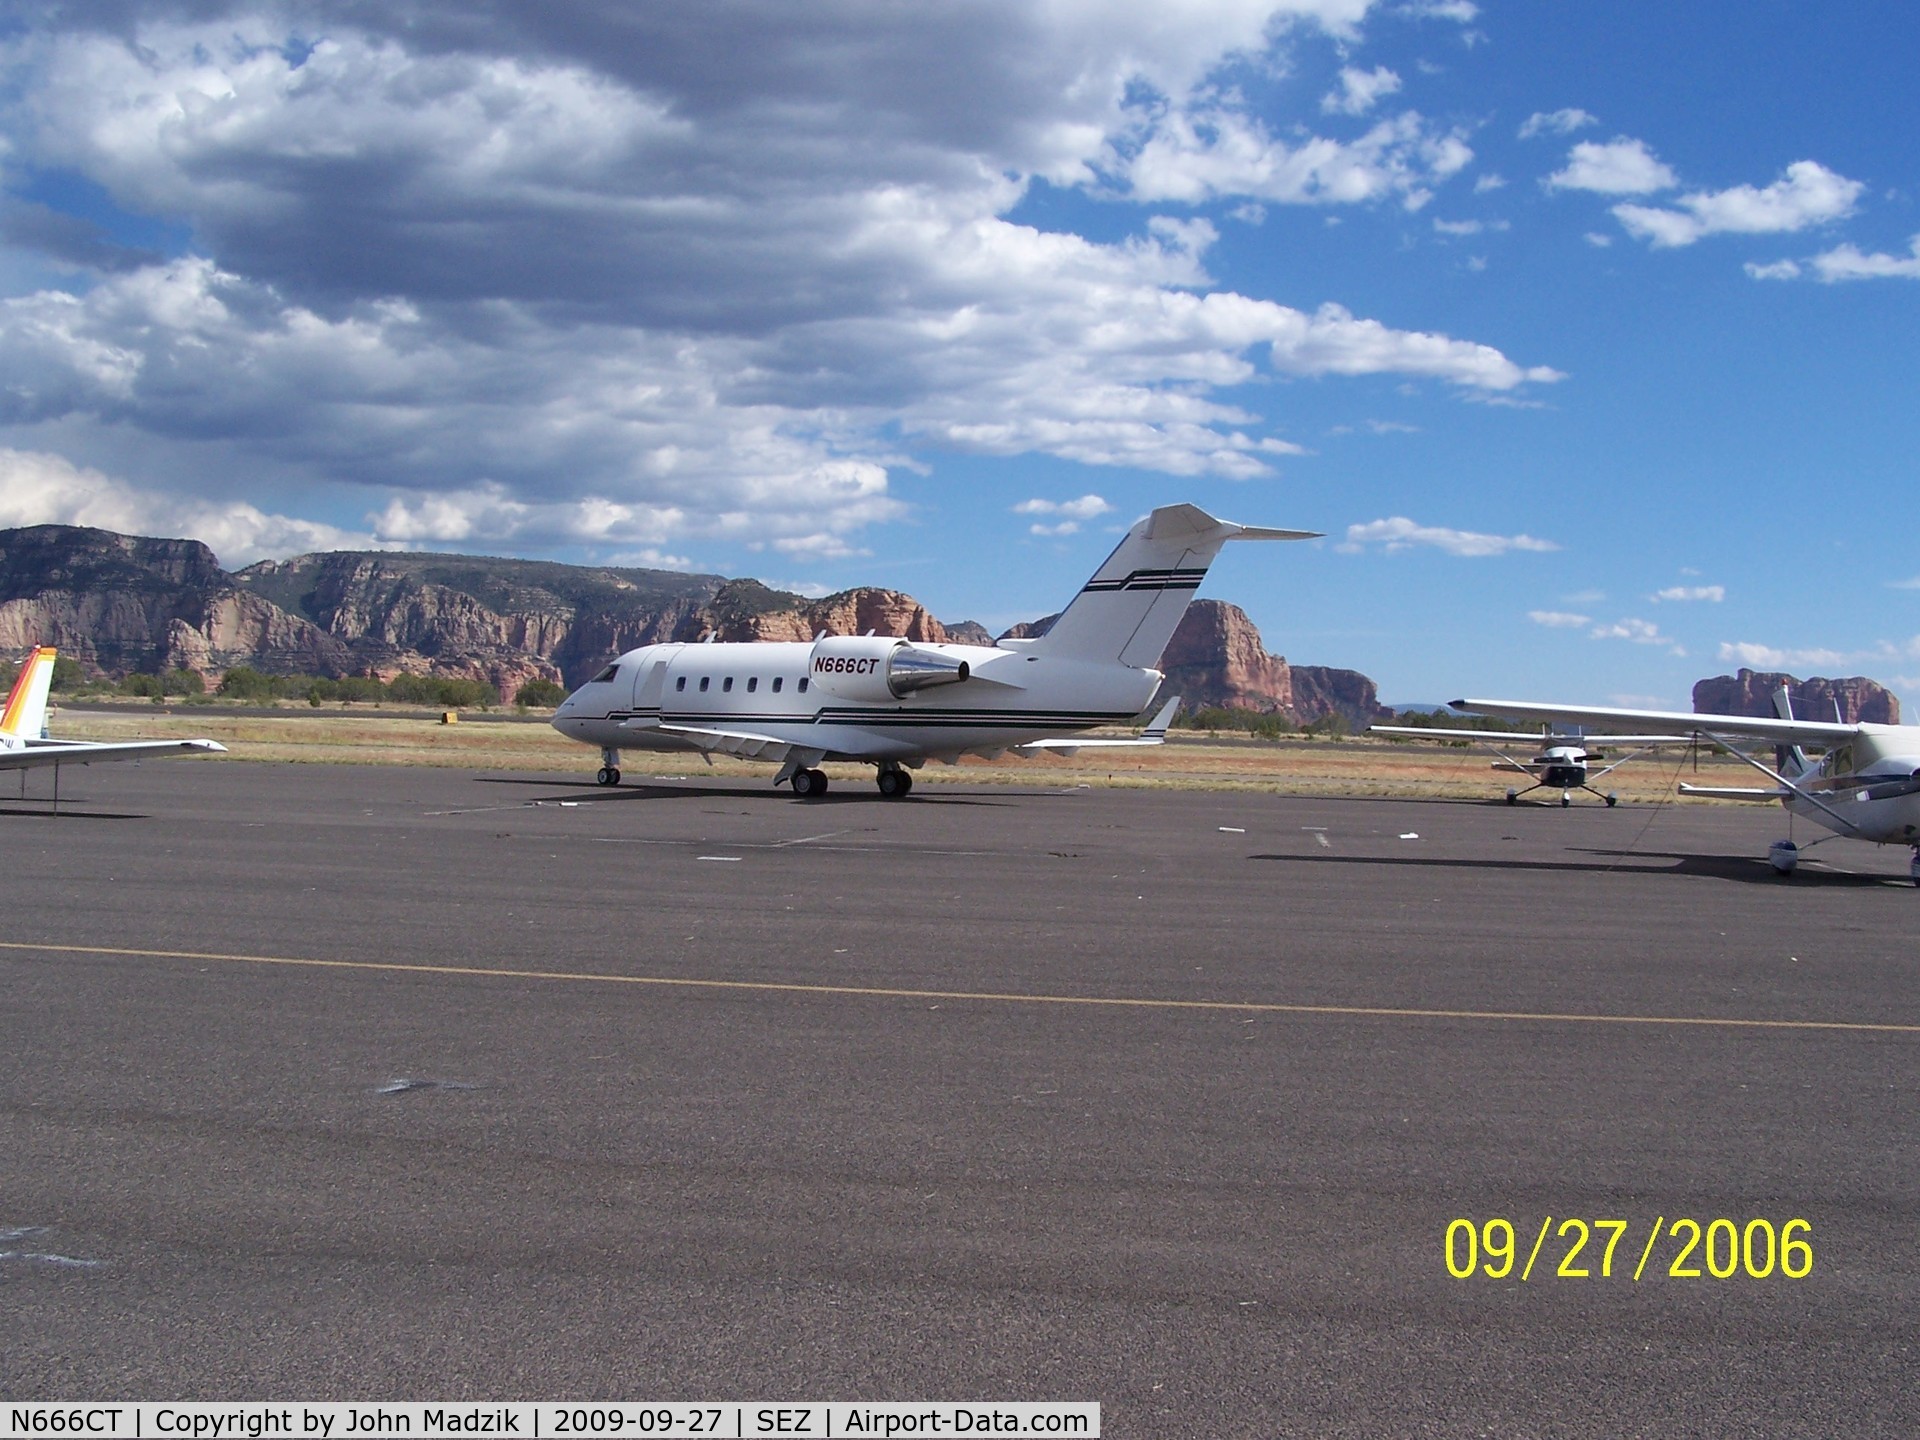 N666CT, 1987 Canadair Challenger 601-3A (CL-600-2B16) C/N 5007, Sedona Airport  Just landed